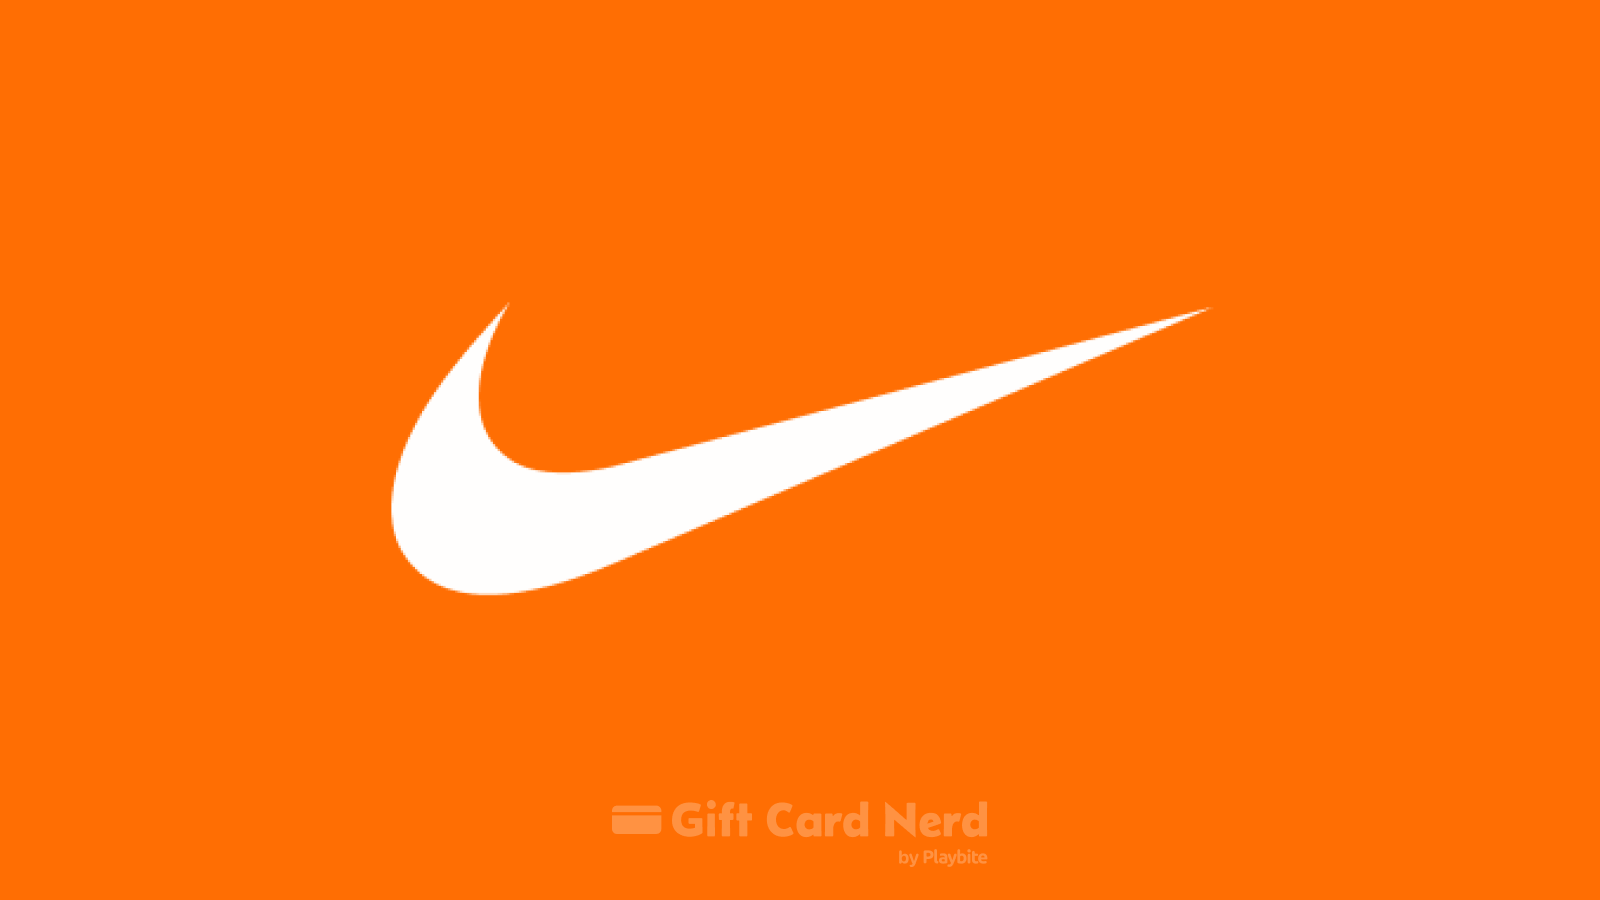 Does Amazon Sell Nike Gift Cards?